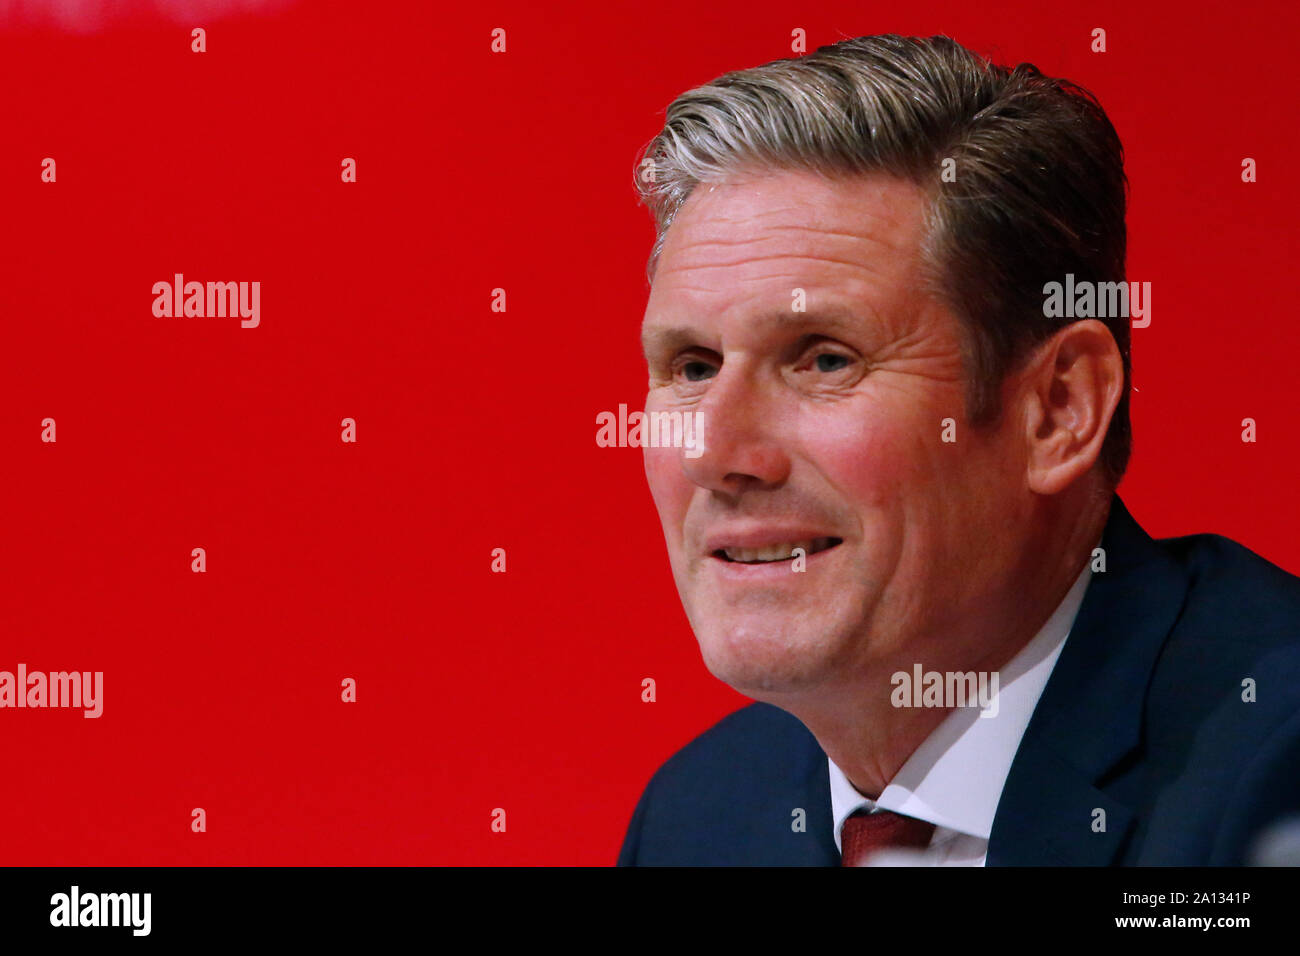 Brighton, UK. 23rd Sep, 2019. Keir Starmer, shadow Exiting the European Union secretary speaks before a vote on the Labour Party's stance on Brexit during the Labour Party Annual Conference 2019 in Brighton, UK. Monday September 22, 2019. Photograph Credit: Luke MacGregor/Alamy Live News Stock Photo